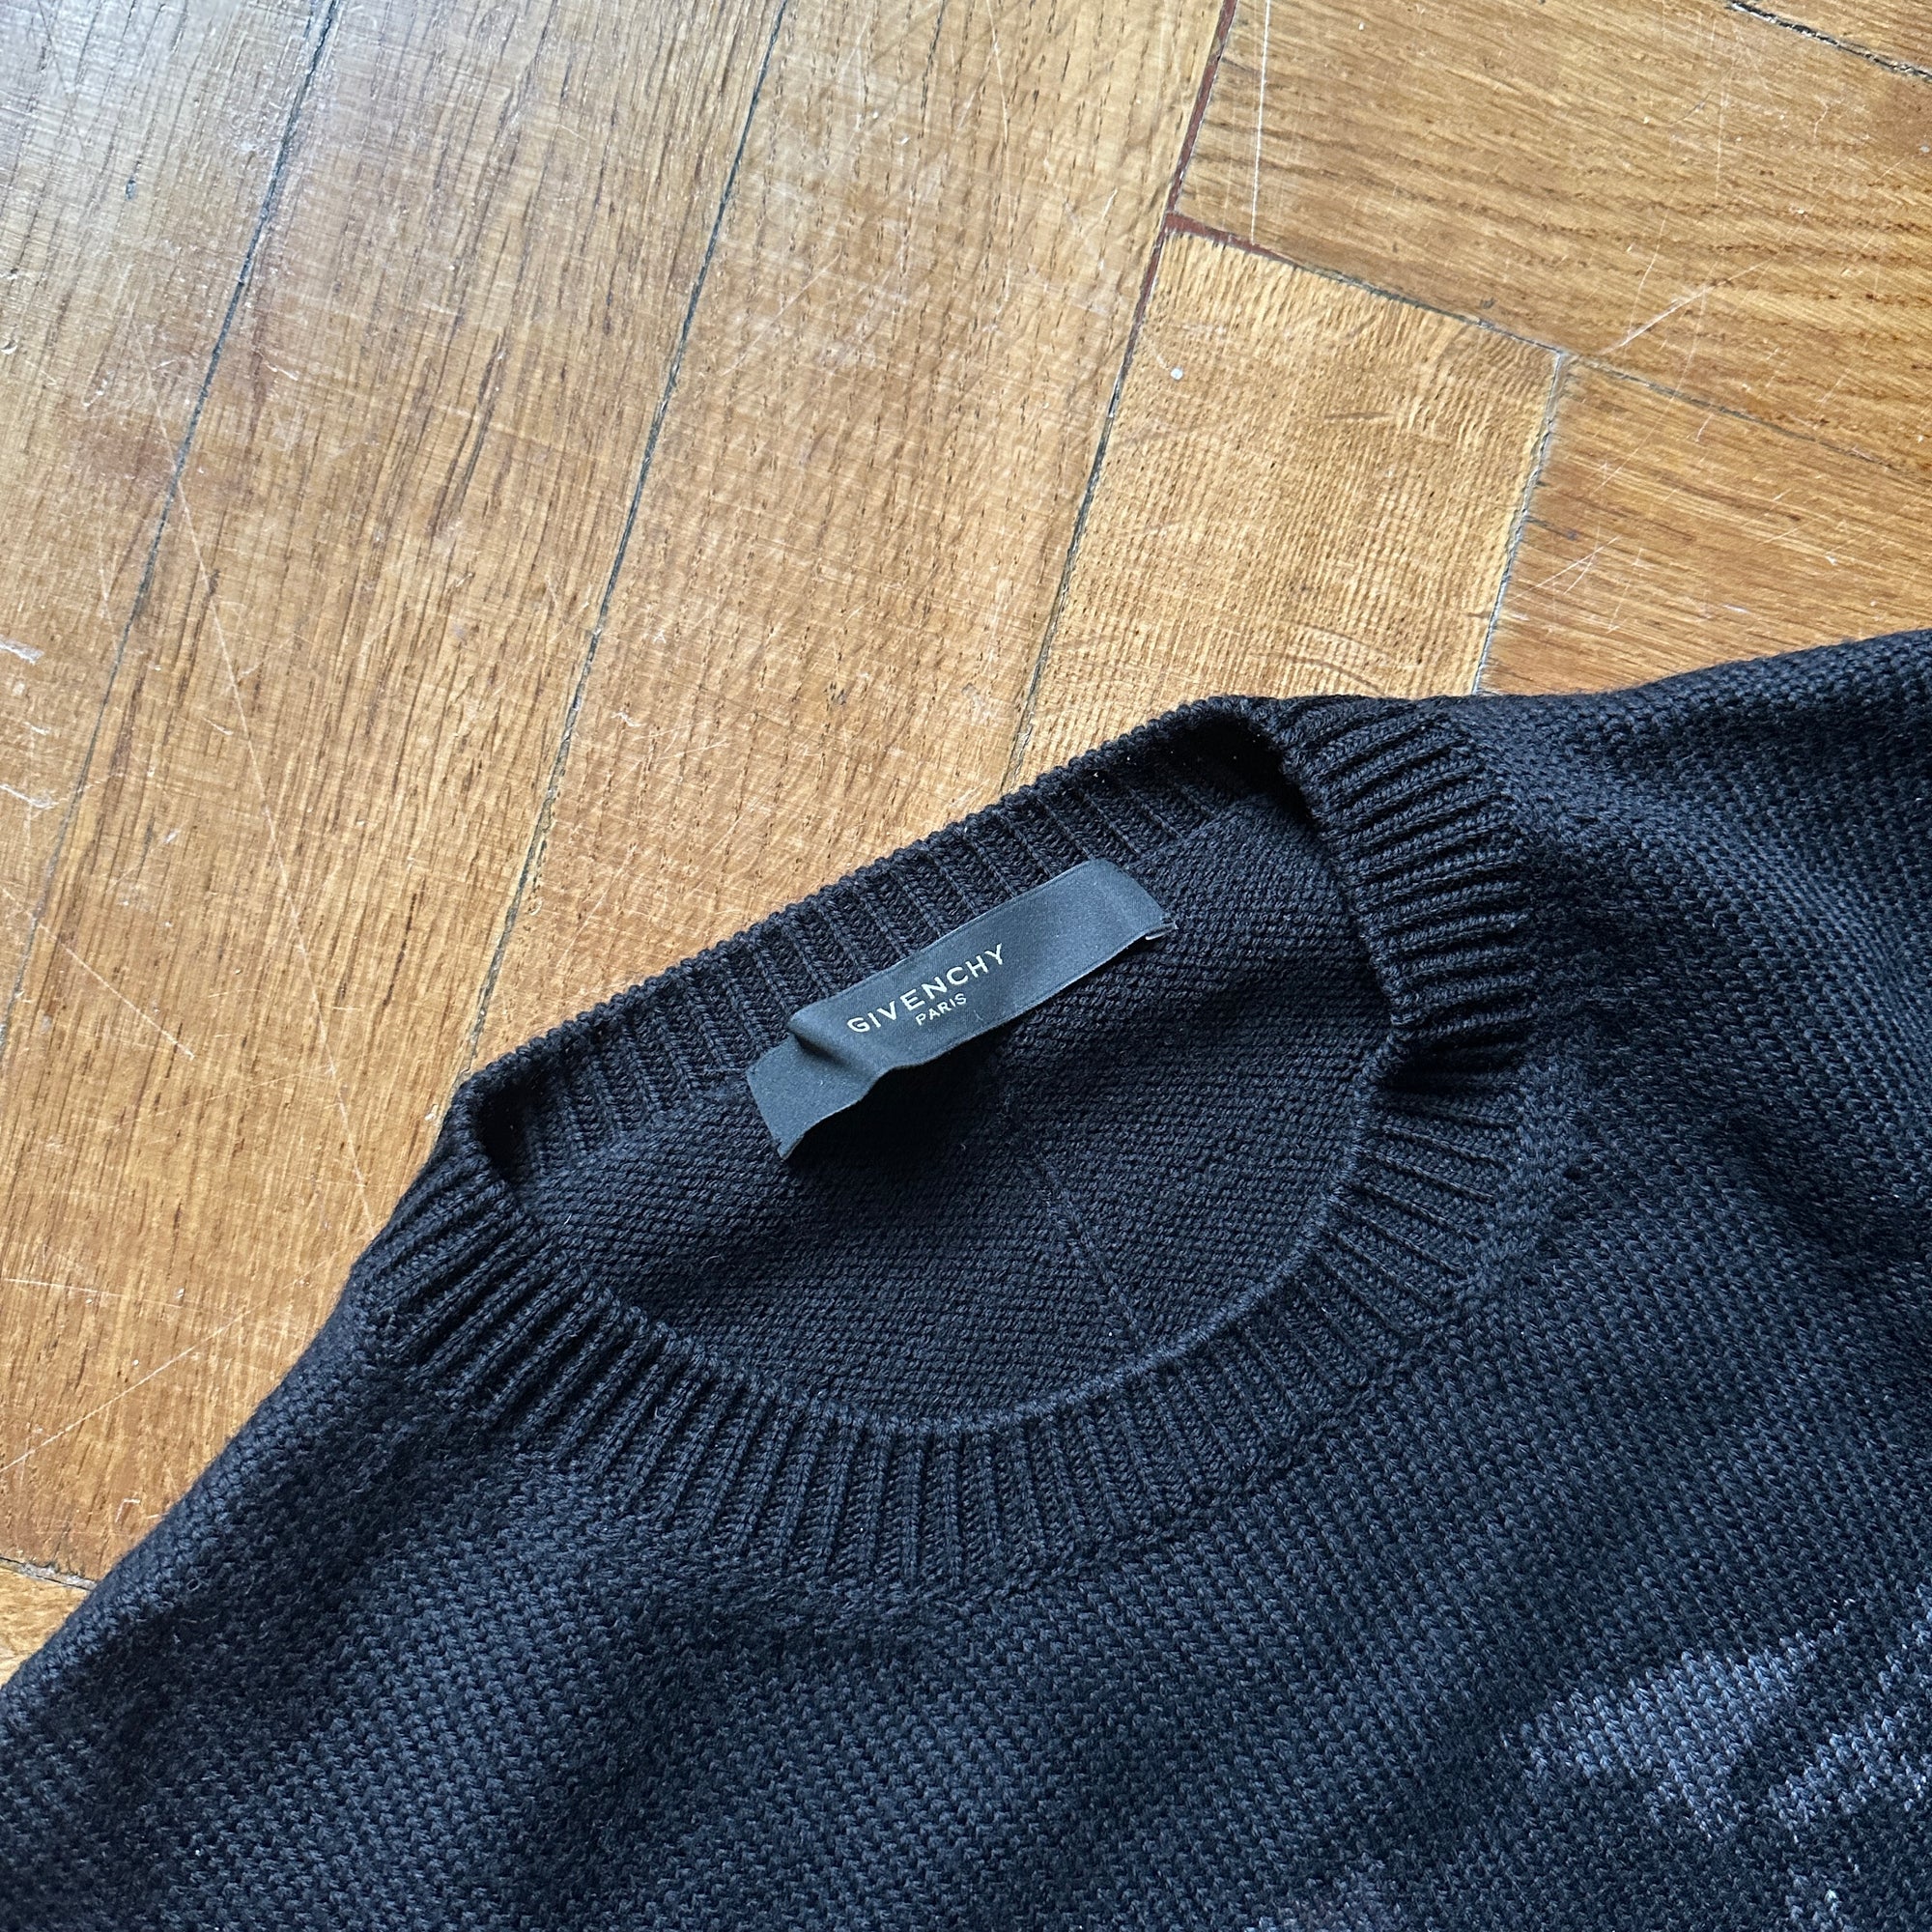 Givenchy FW13 Rottweiler Knit Sweater